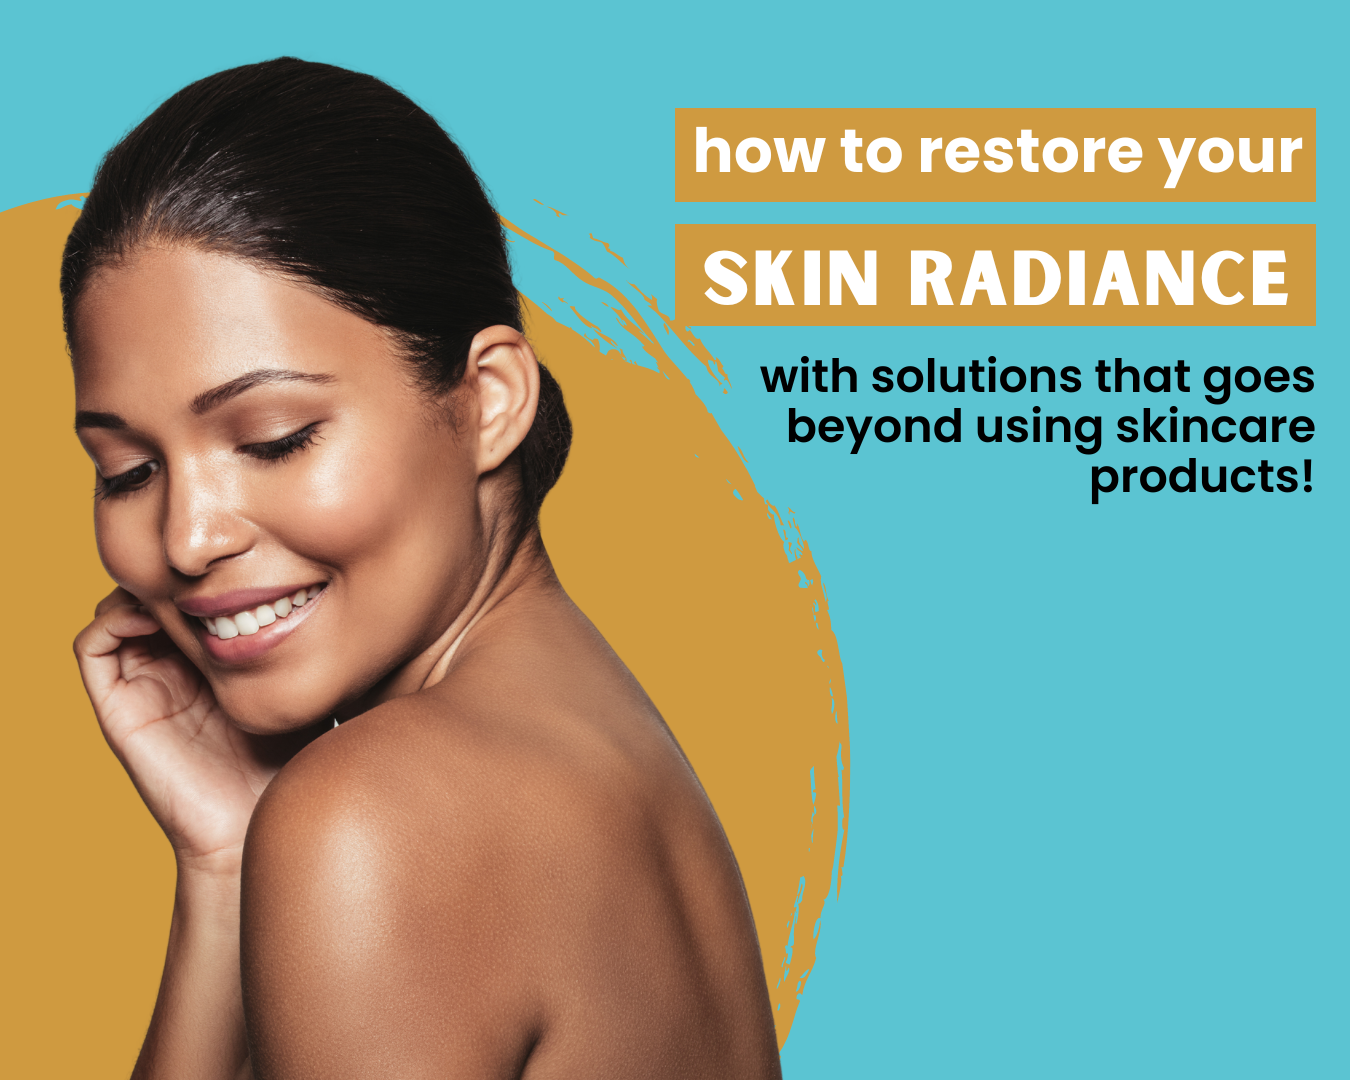 image of a black woman with radiant skin and text on the right side reading: how to restore your skin radiance